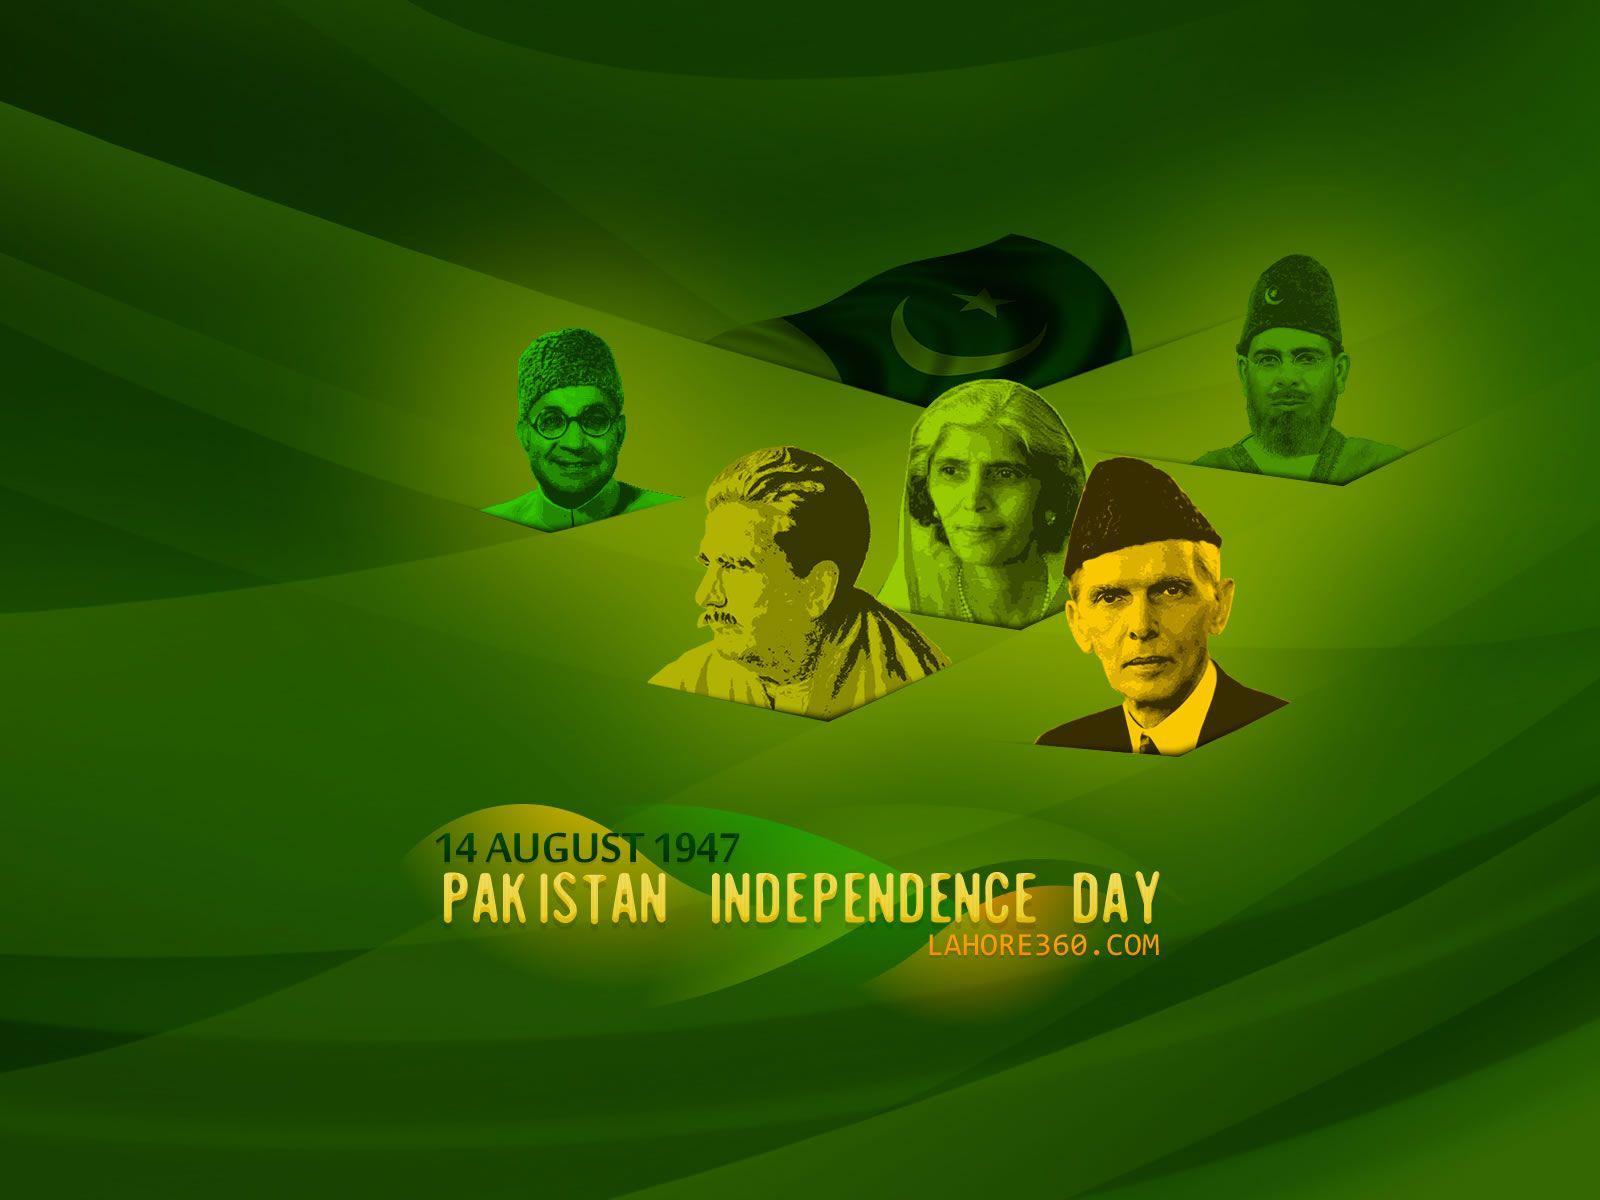 Pakistan Flag Wallpaper HD. Independence day wallpaper, Pakistan independence, Pakistan independence day